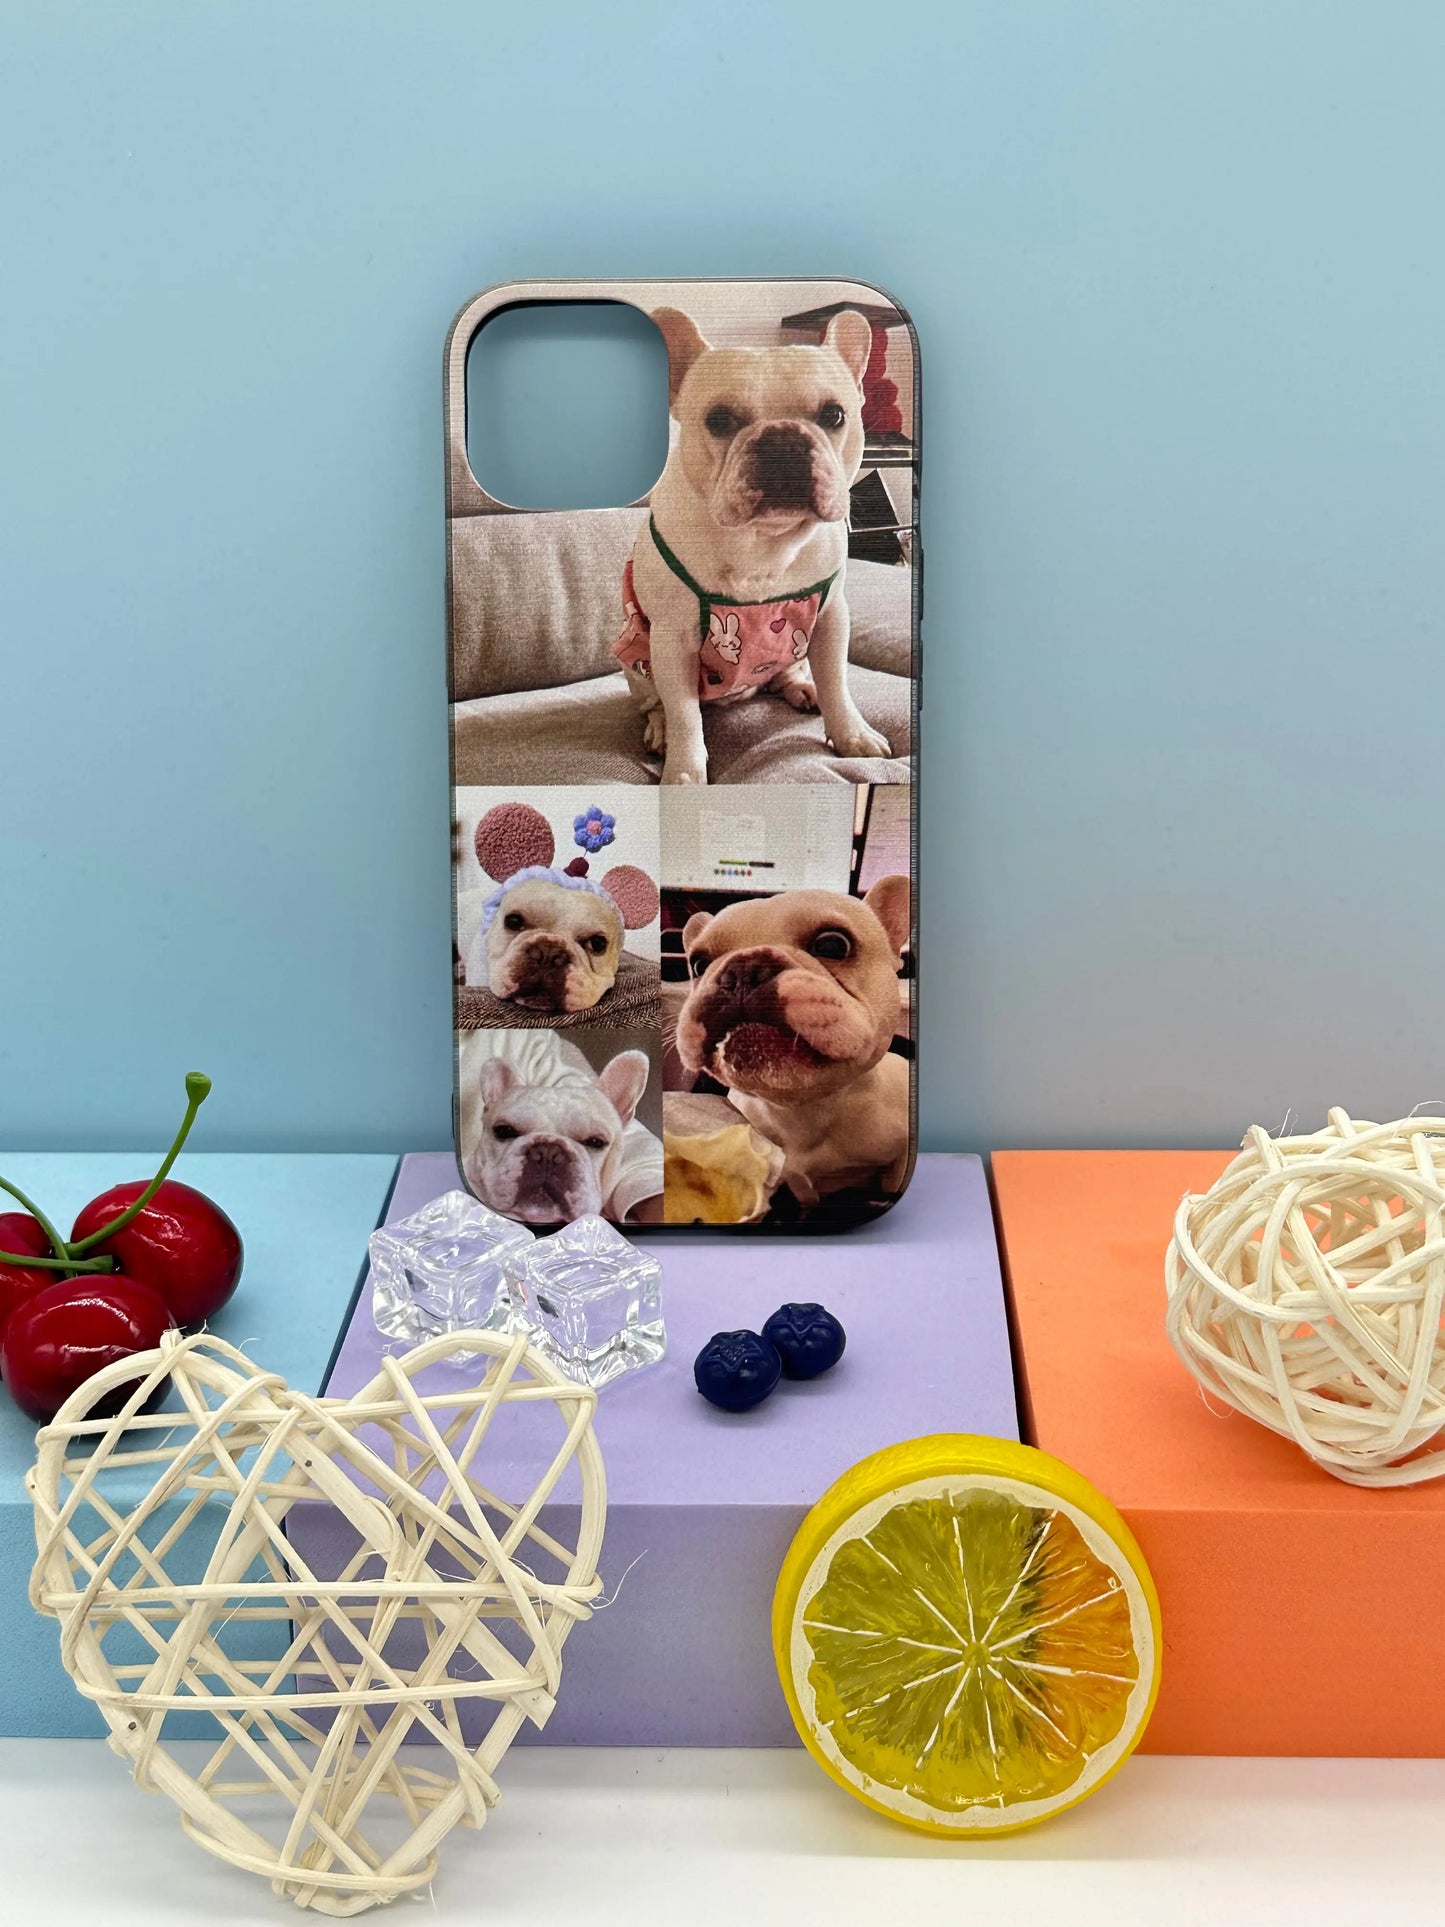 iPhone All Models |Samsung S8- NOTE 20U | Multi Pictures Collage Phone Case Sunday's Creative